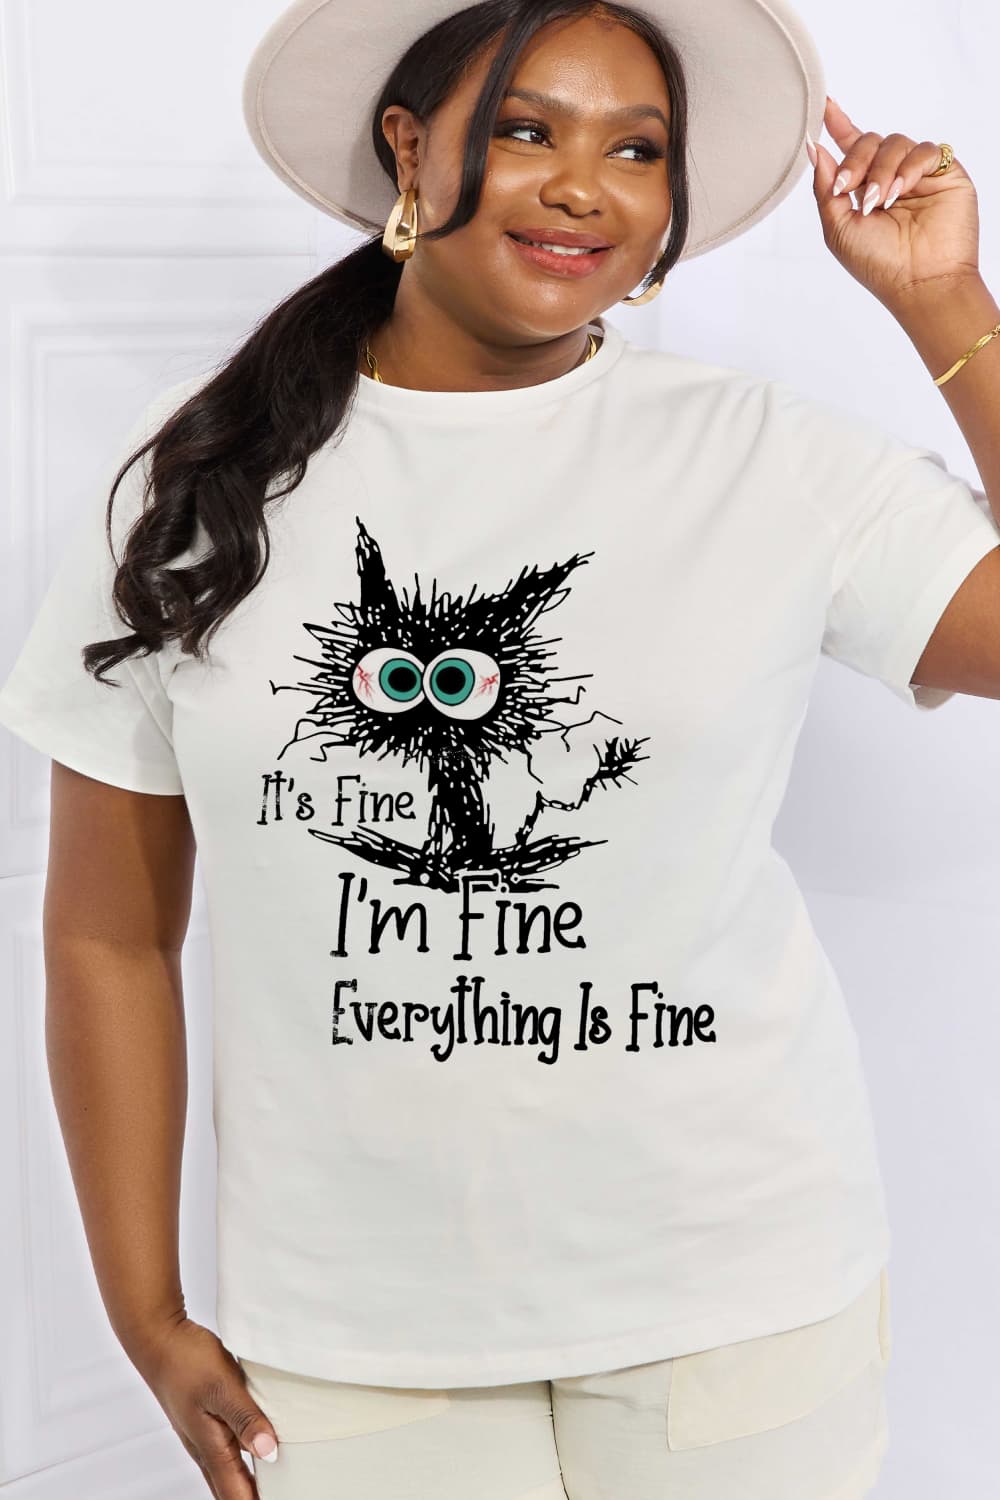 Simply Love Full Size IT鈥楽 FINE IT鈥楽 FINE EVERYTHING IS FINE Graphic Cotton Tee